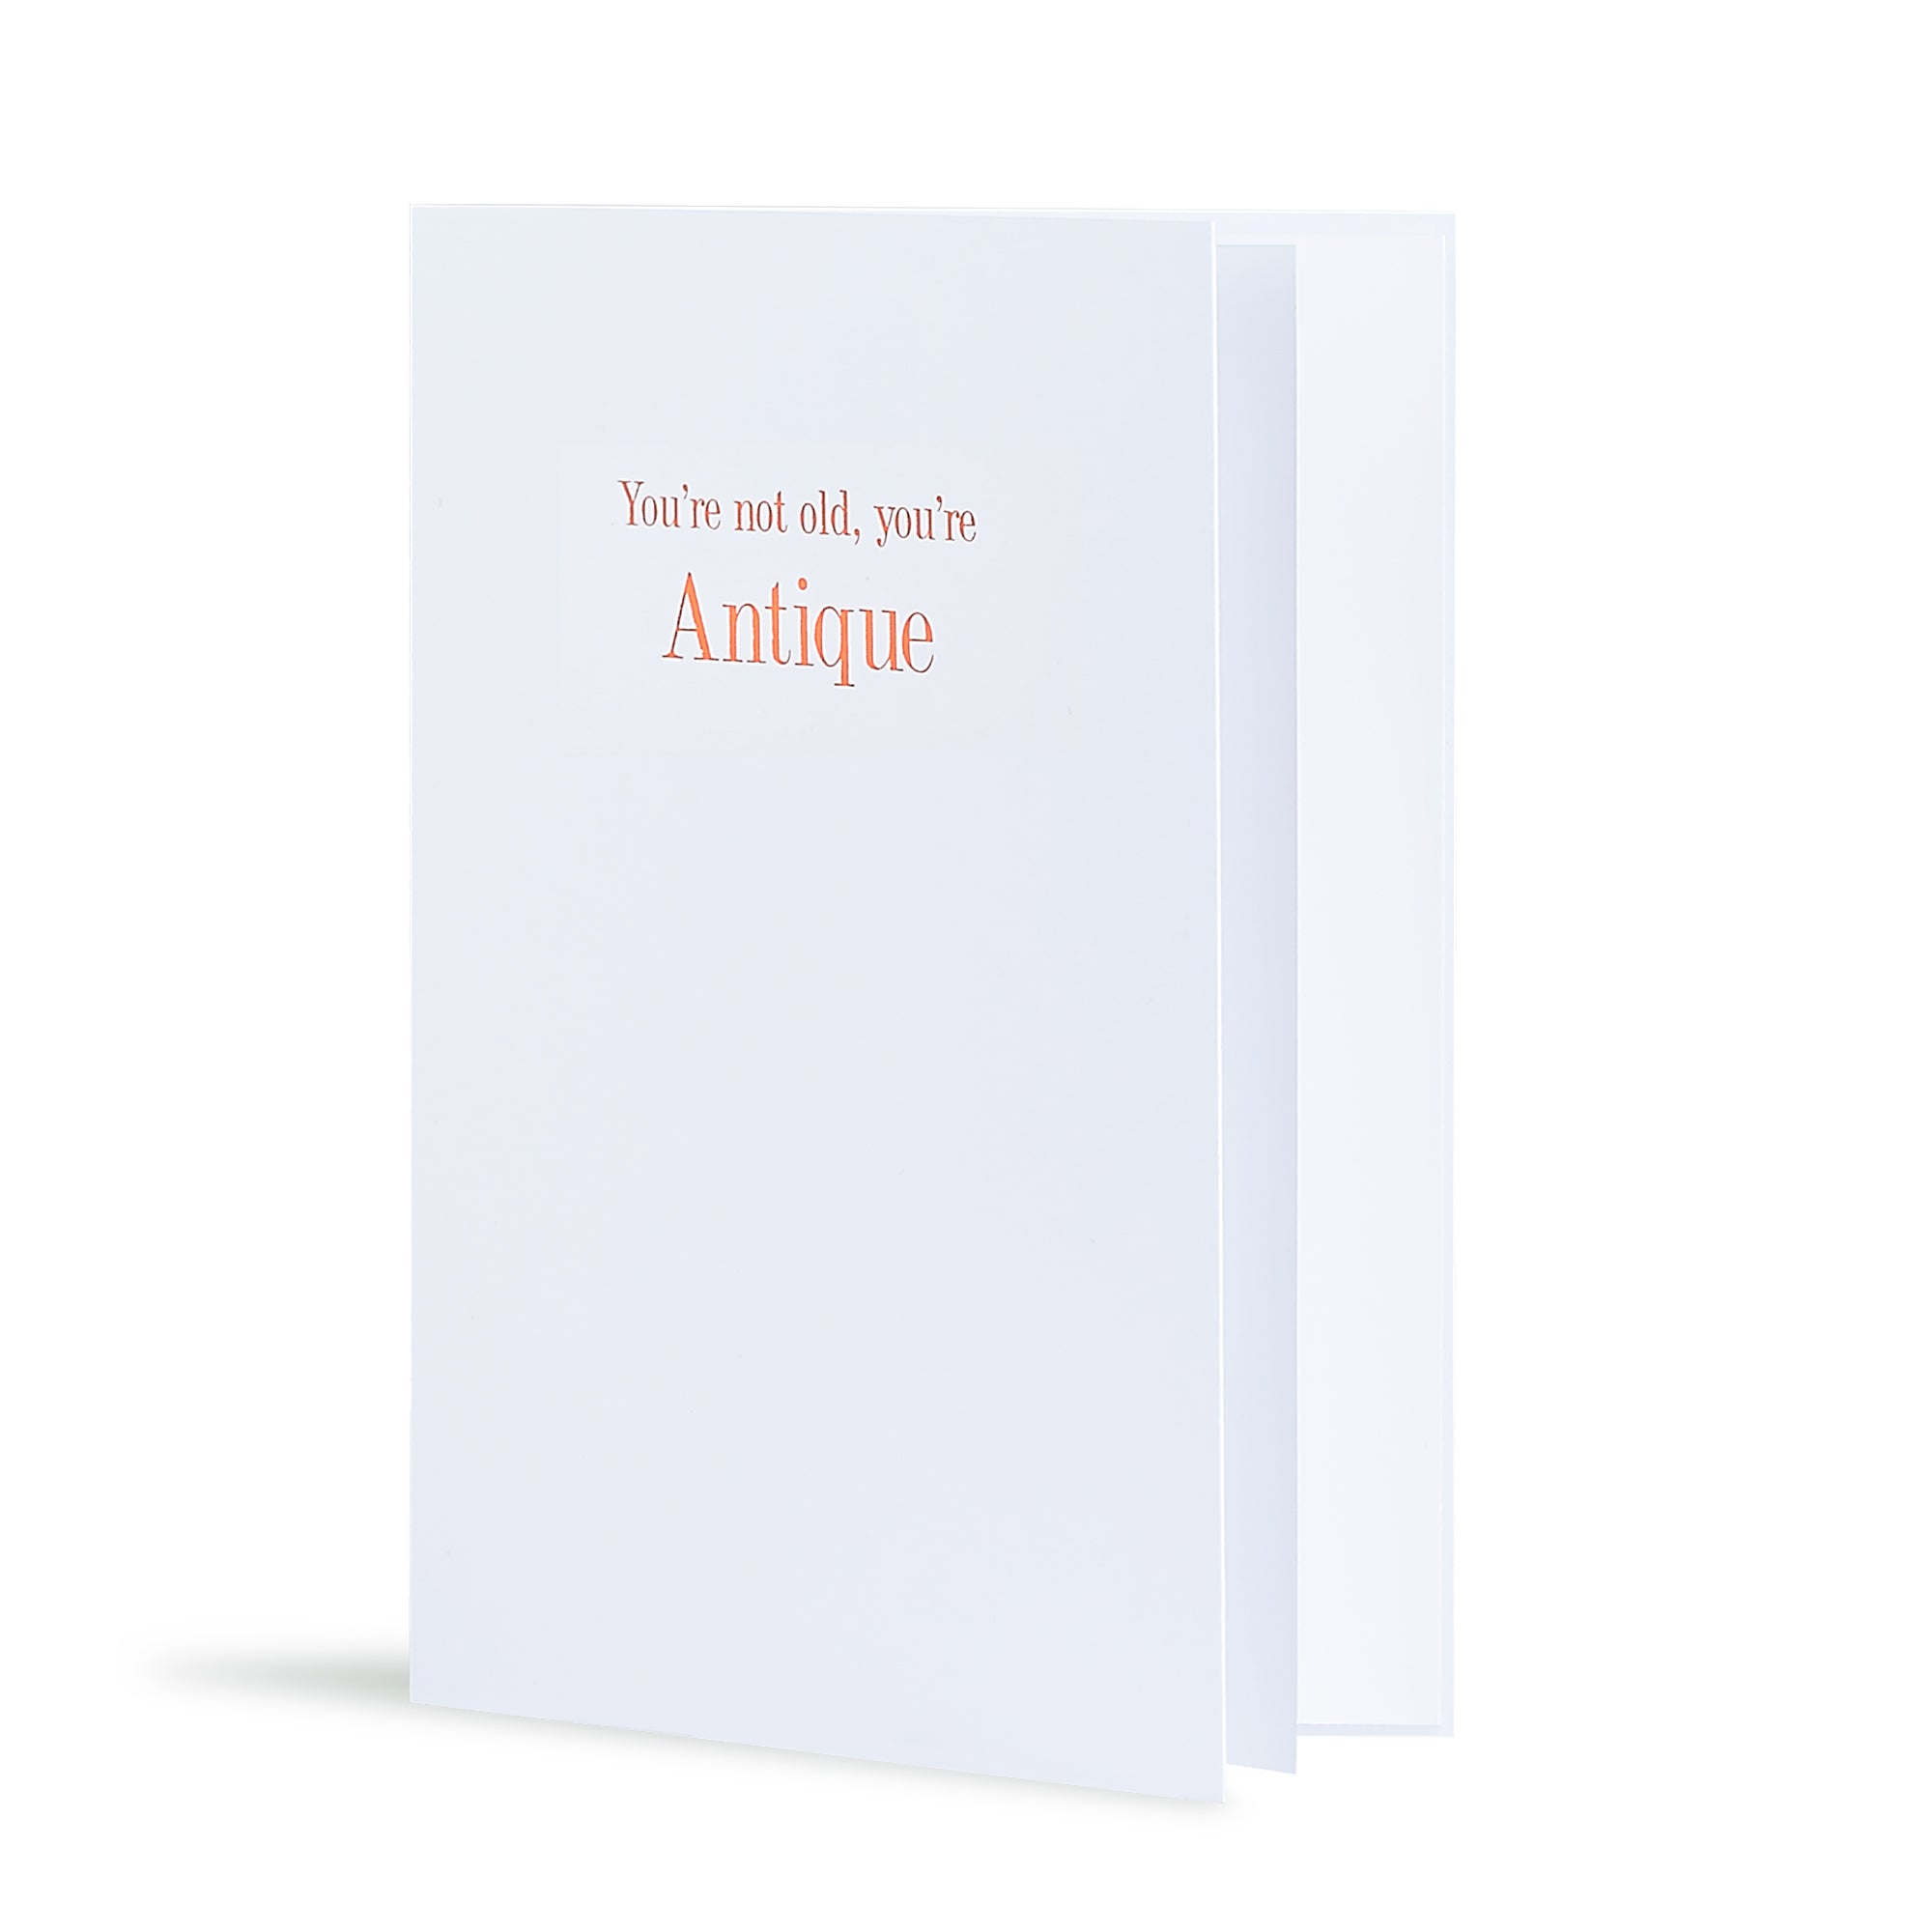 You're Not Old Youre Antique Greeting Card in White, Side